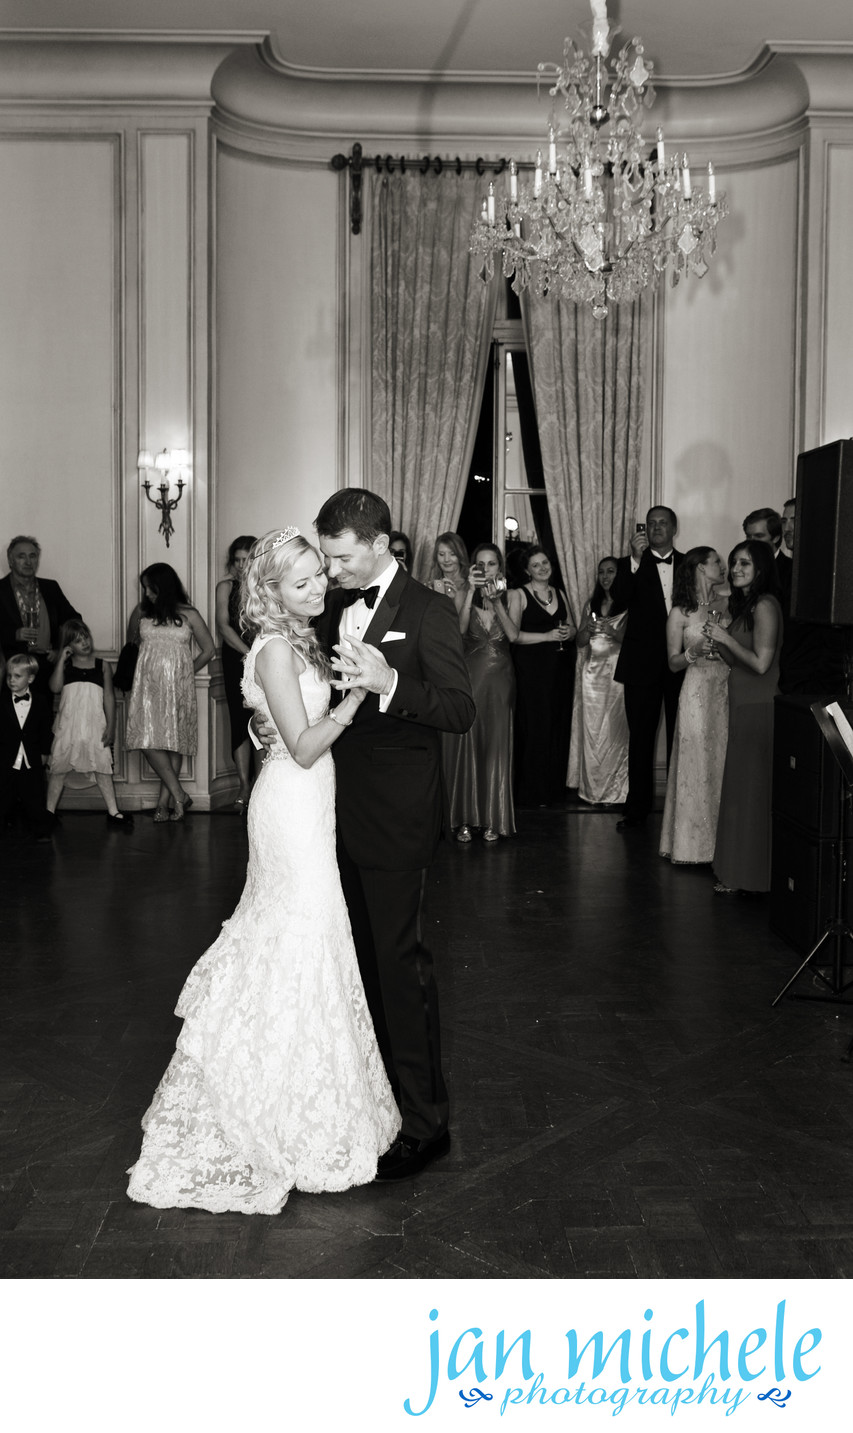 First Dance in a classic ballroom in a historic mansion in Washington DC